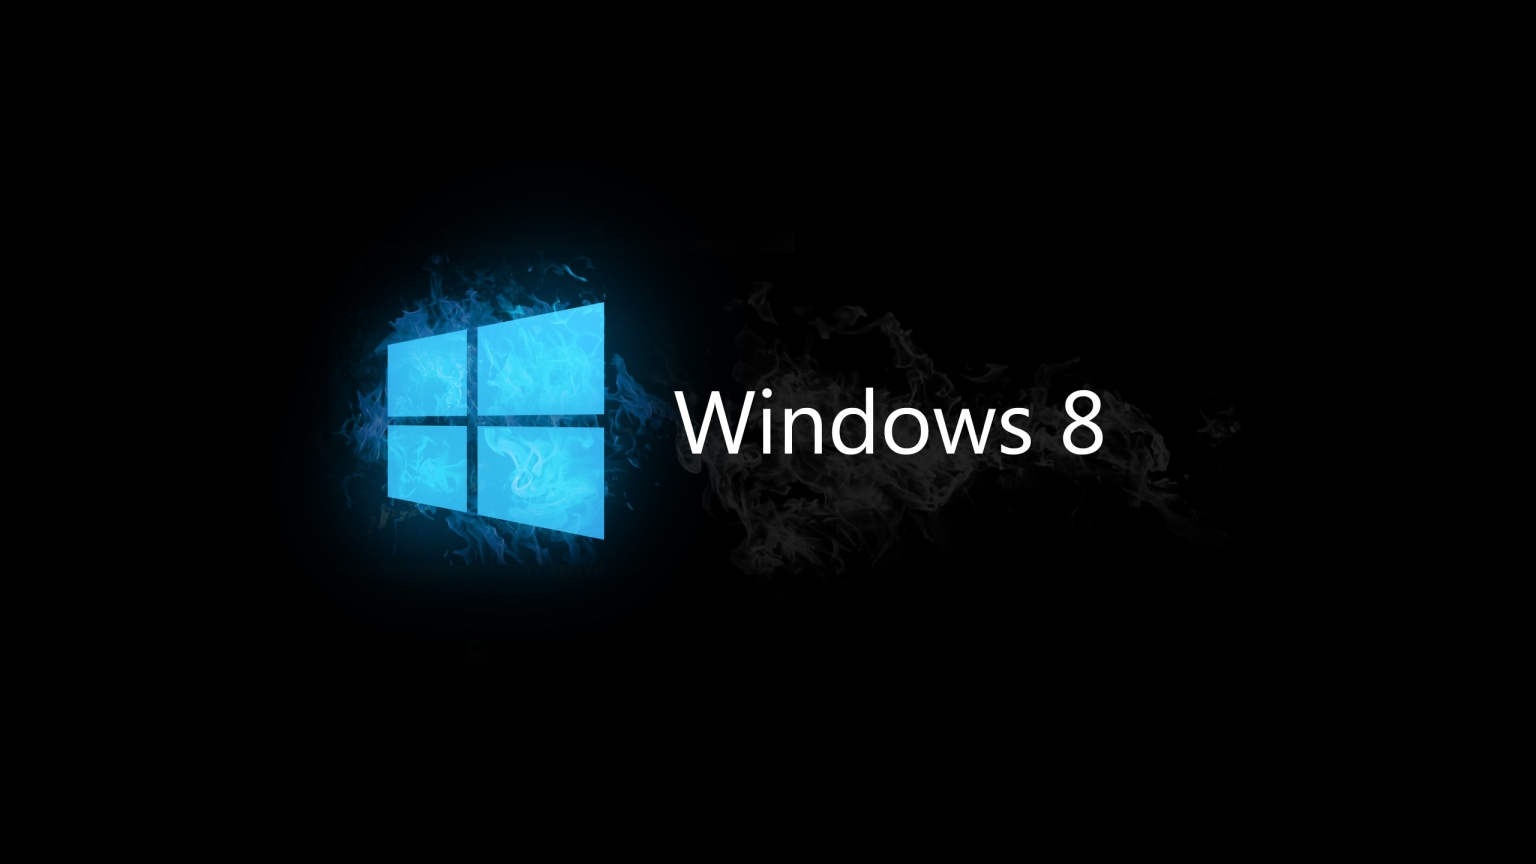 Windows 8 Blue and Black for 1536 x 864 HDTV resolution